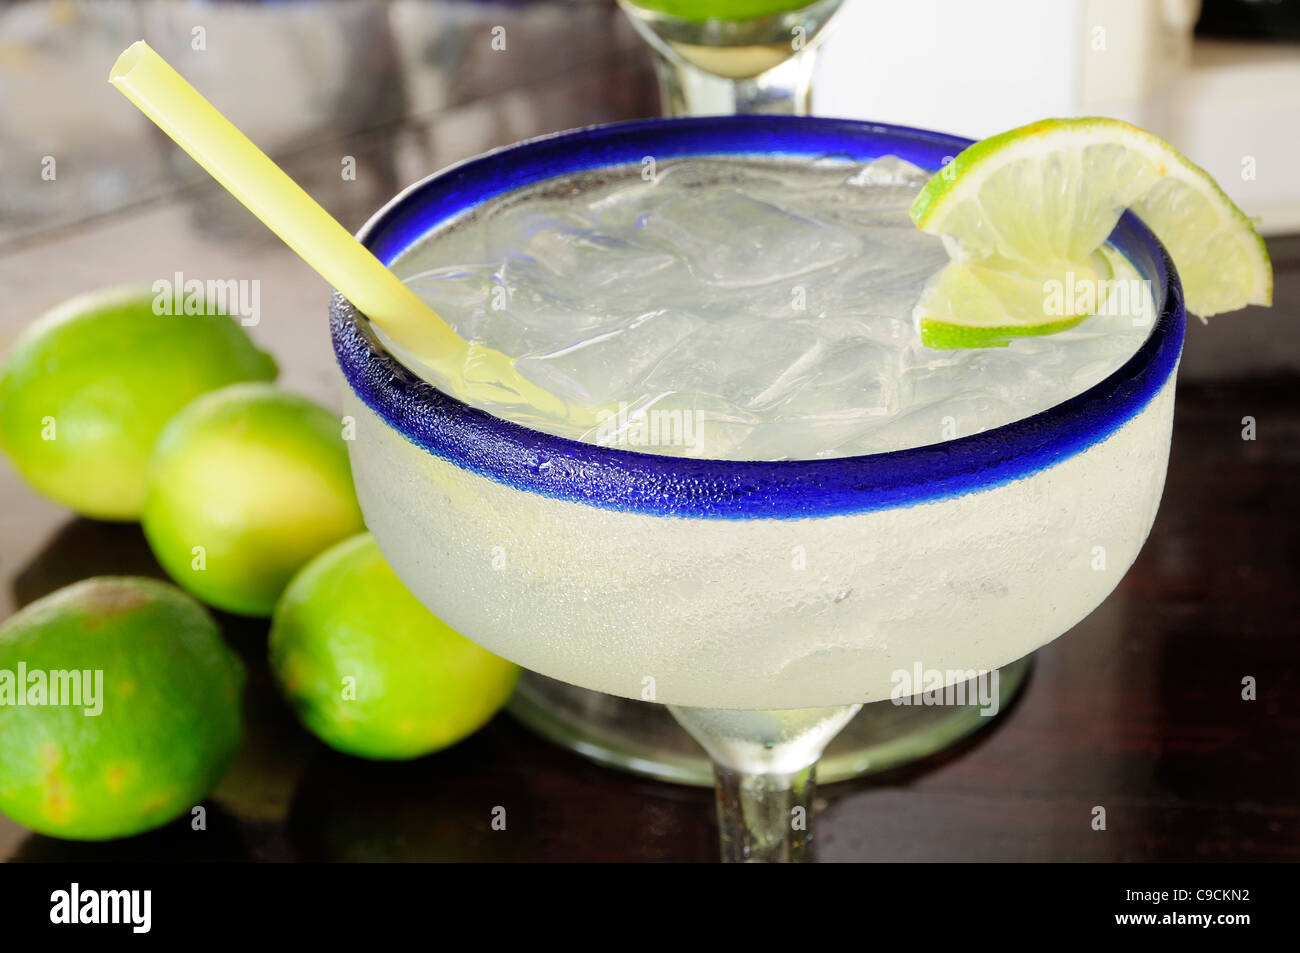 Mexico, Jalisco, Puerto Vallarta, Frosted glass of a margarita cocktail served with ice and slice of lime Stock Photo